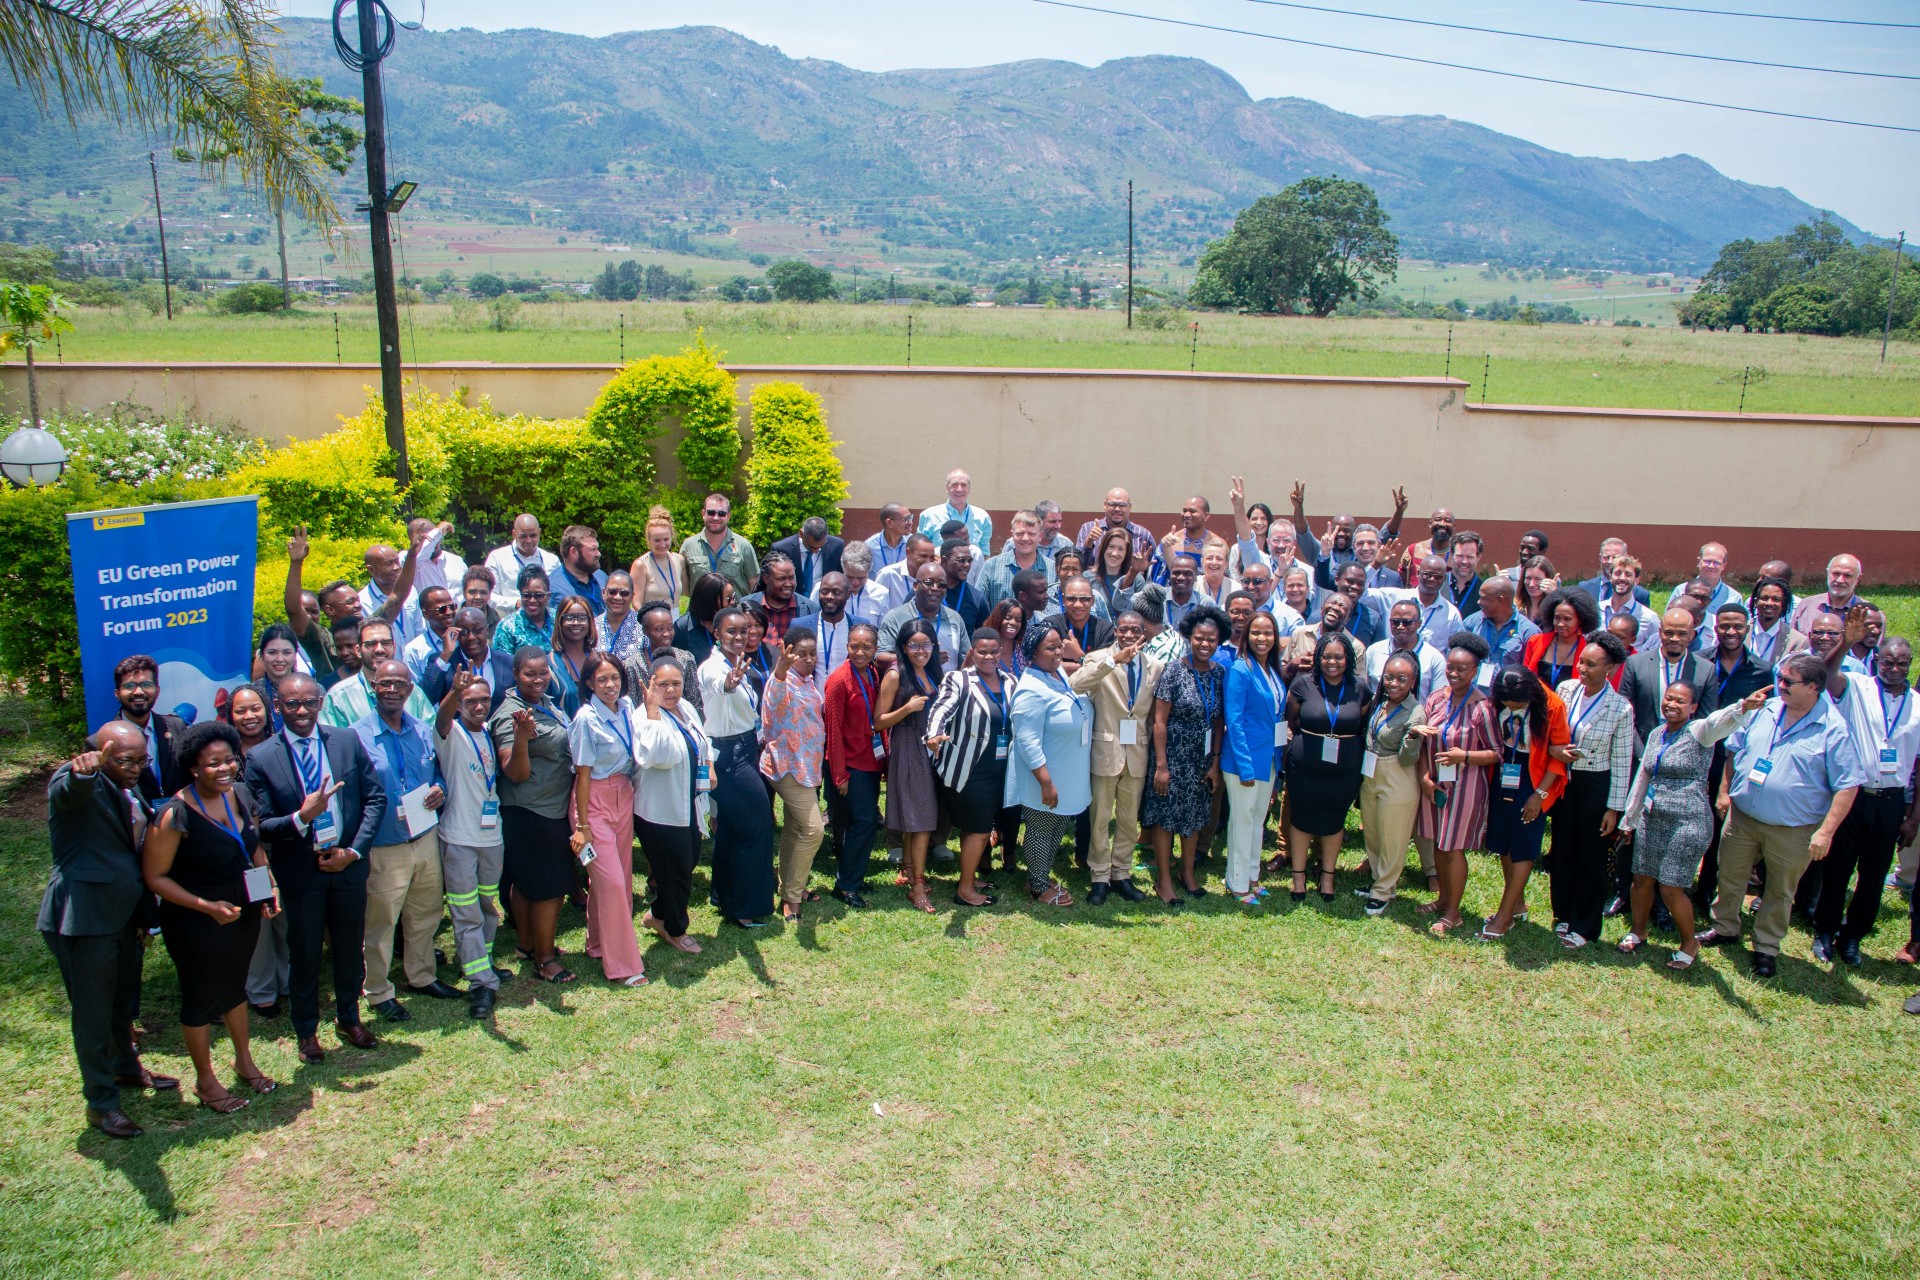 Attendees at the EU Green Power Transformation Forum 2023 in Eswatini in November 2023.